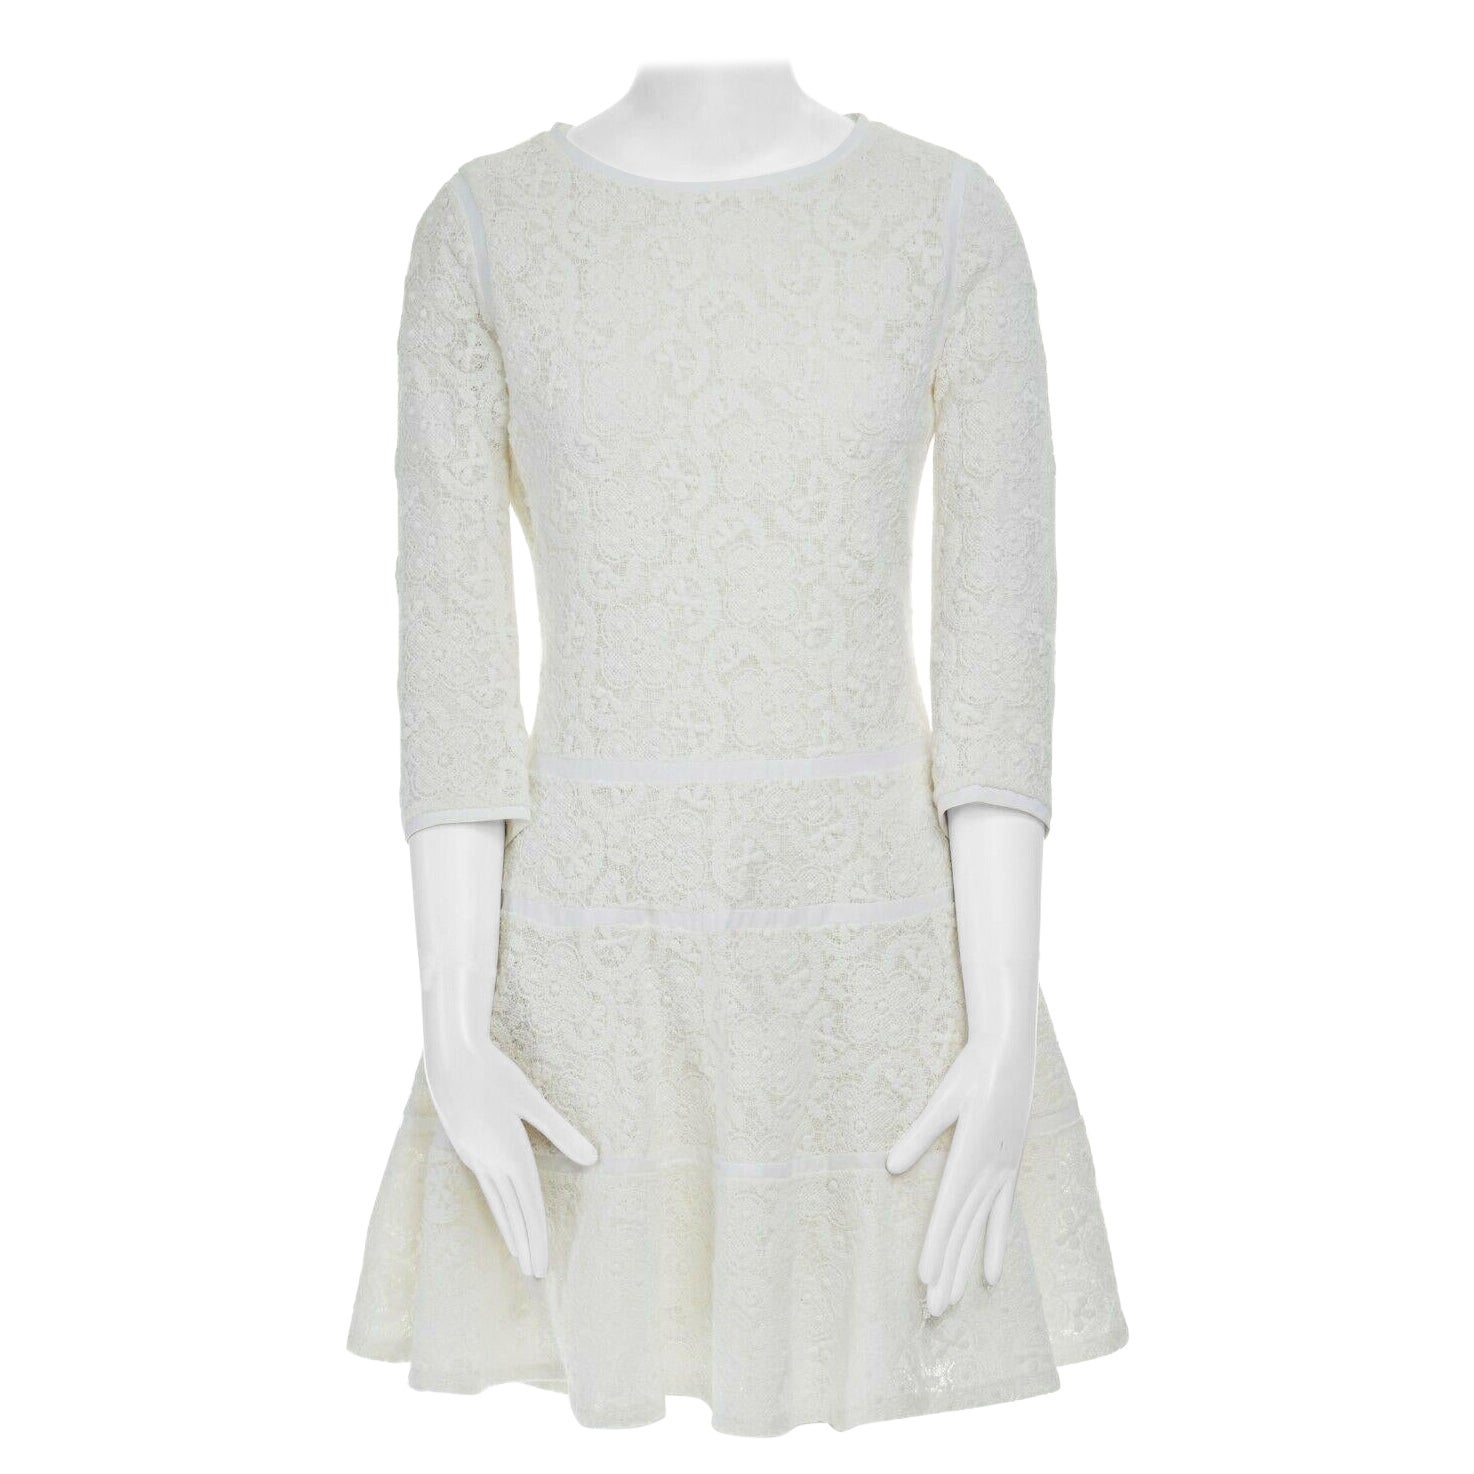 SEE BY CHLOE cream floral embroidered cotton 3/4 sleeves flared cocktail dress S